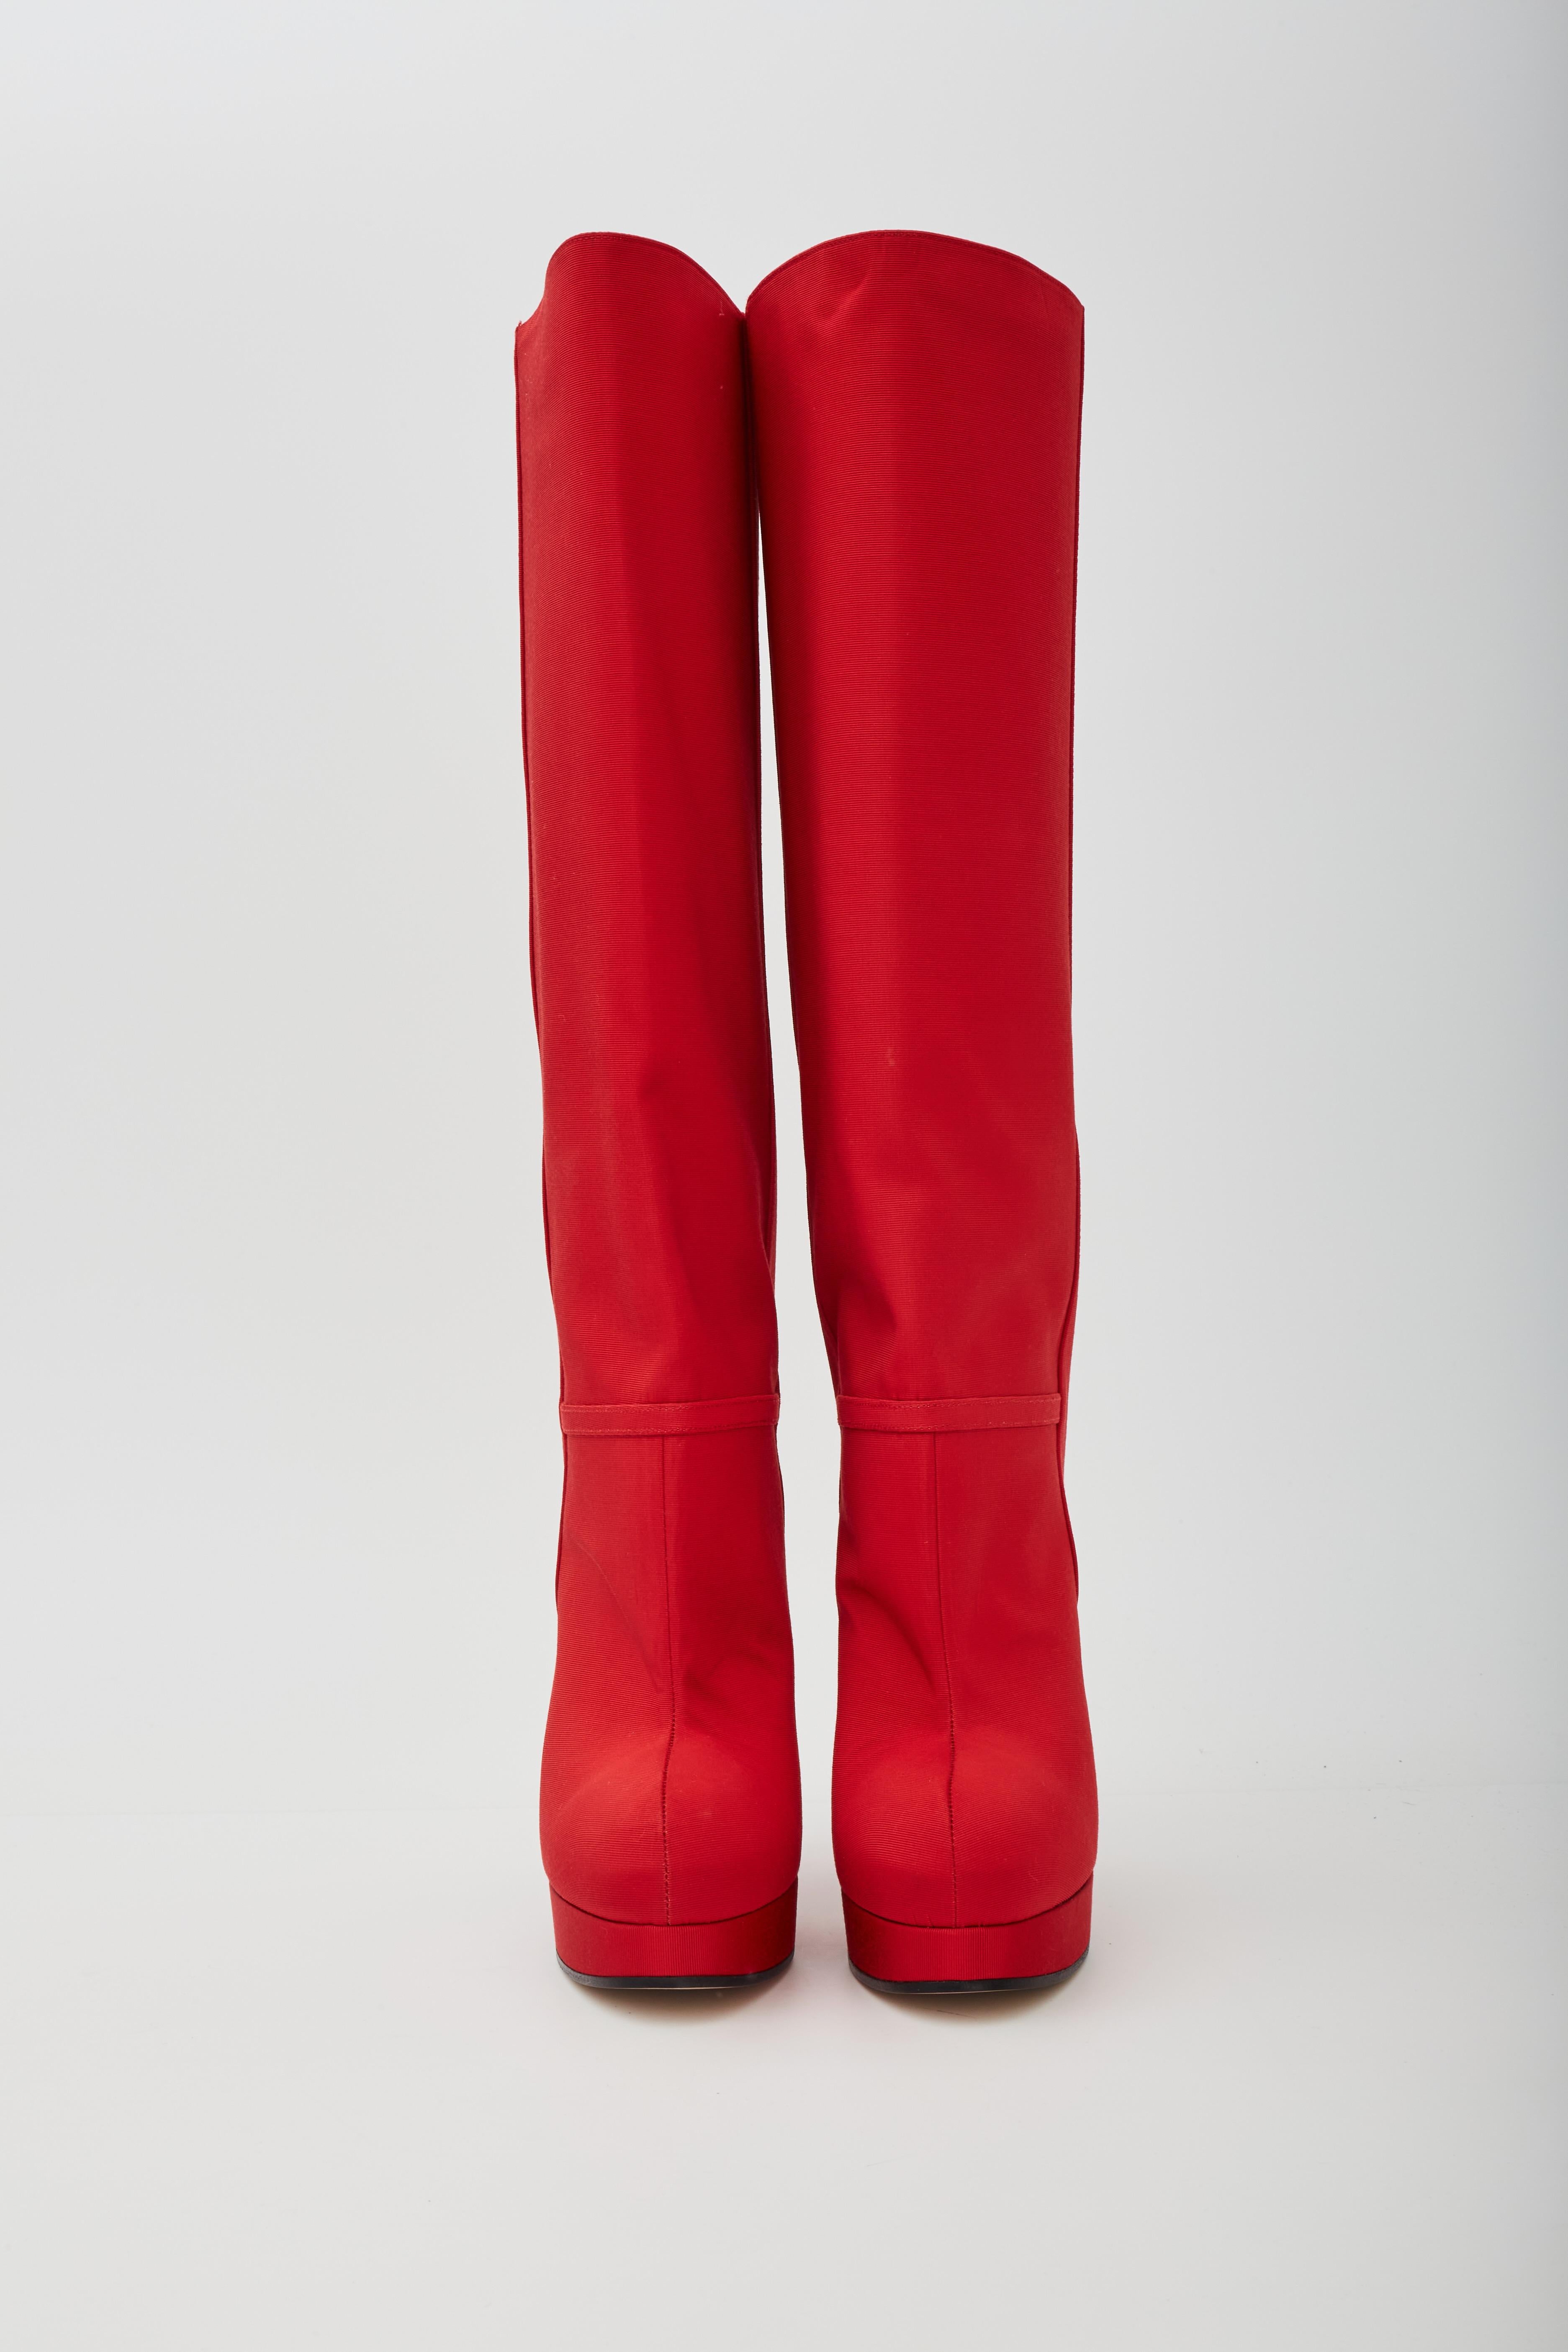 GUCCI RIBBED FABRIC RED PLATFORM KNEE HIGH BOOTS (588968) 38.5 EU
Gucci Ribbed Fabric Red Platform Knee High Boots (588968) 38.5 EU

Red platform boots from Gucci. Made of ribbed fabric. Beige leather sole.

COLOR: red
MATERIAL: Ribbed Fabric
SIZE: